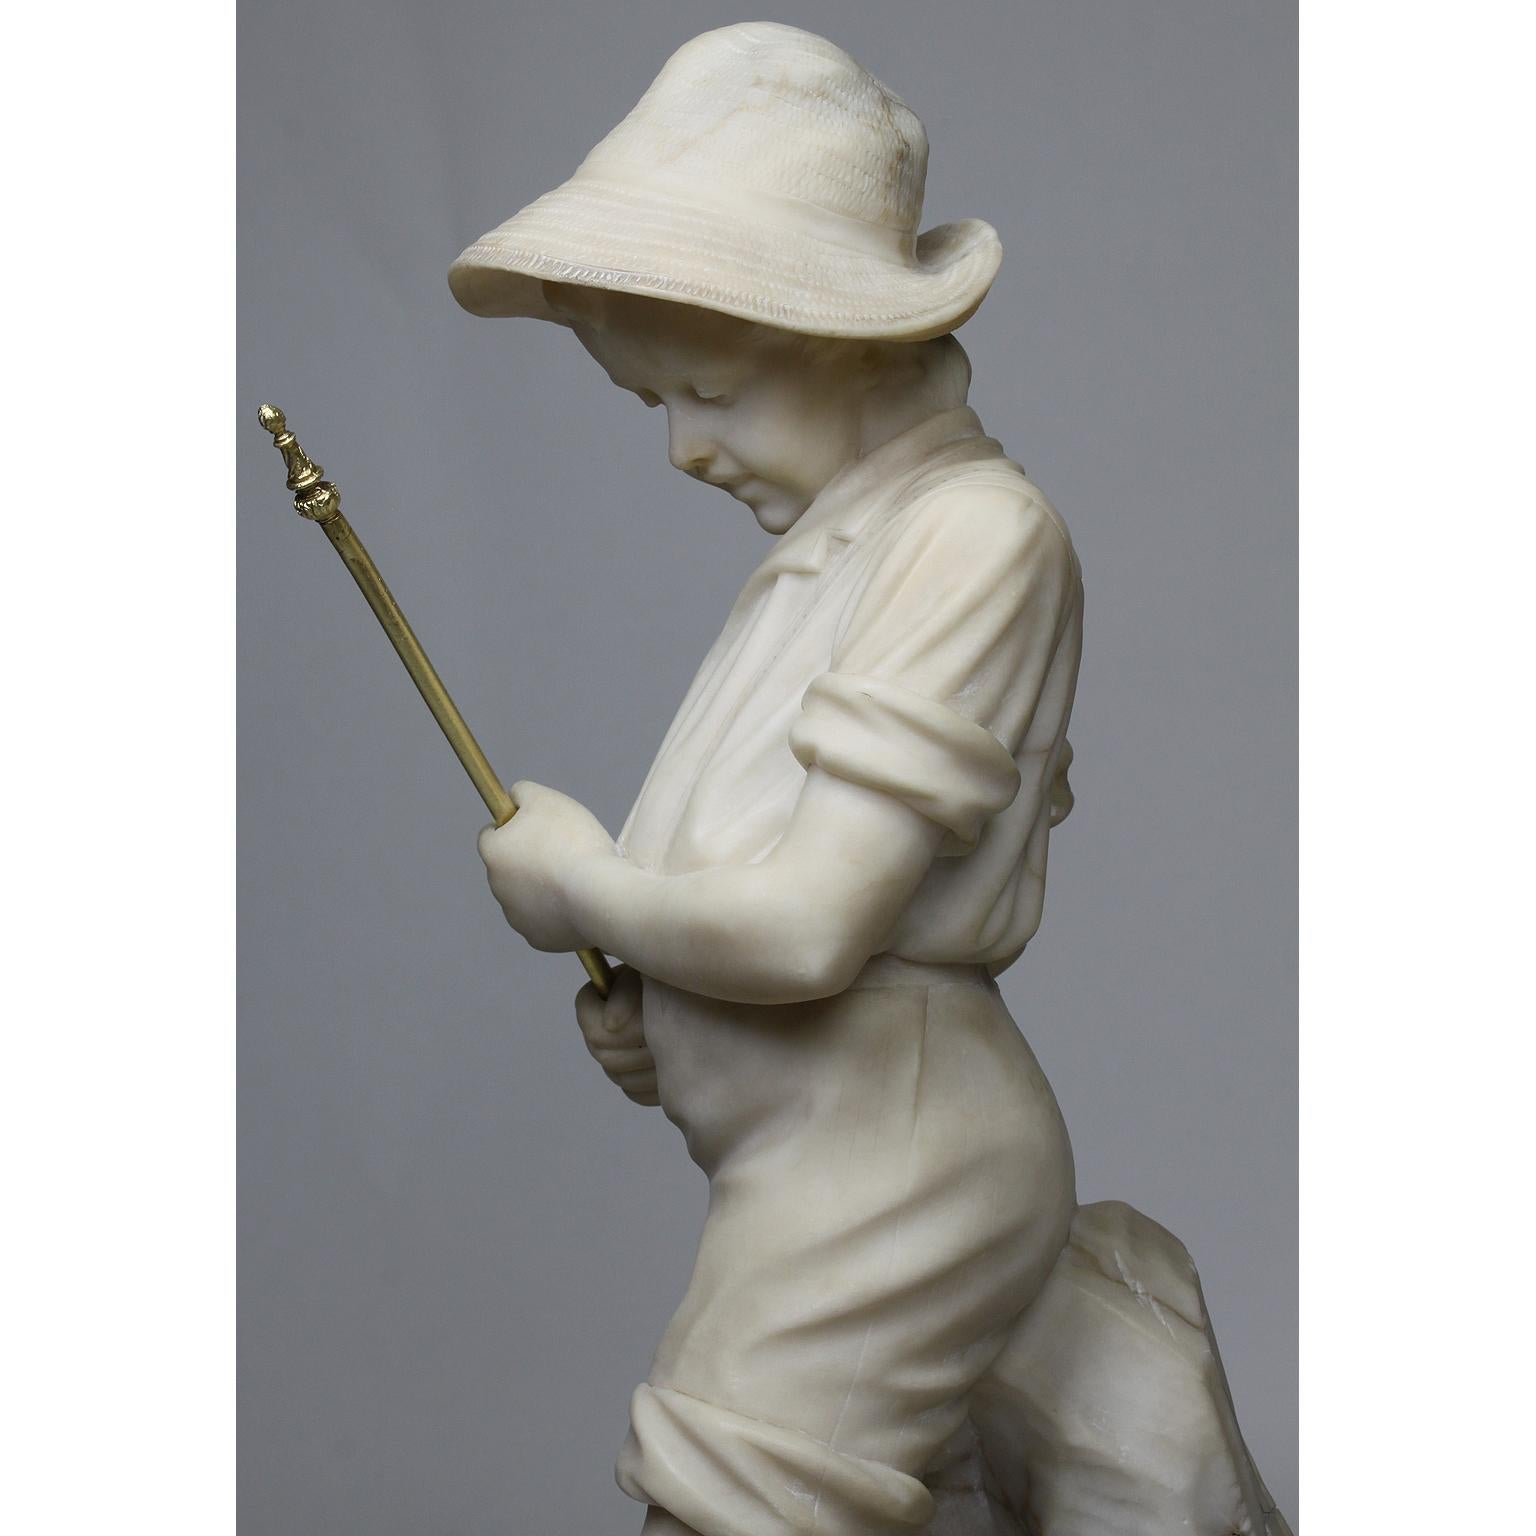 Charming Italian 19th-20th Century Carved Alabaster Figure of a Fisher Boy For Sale 1